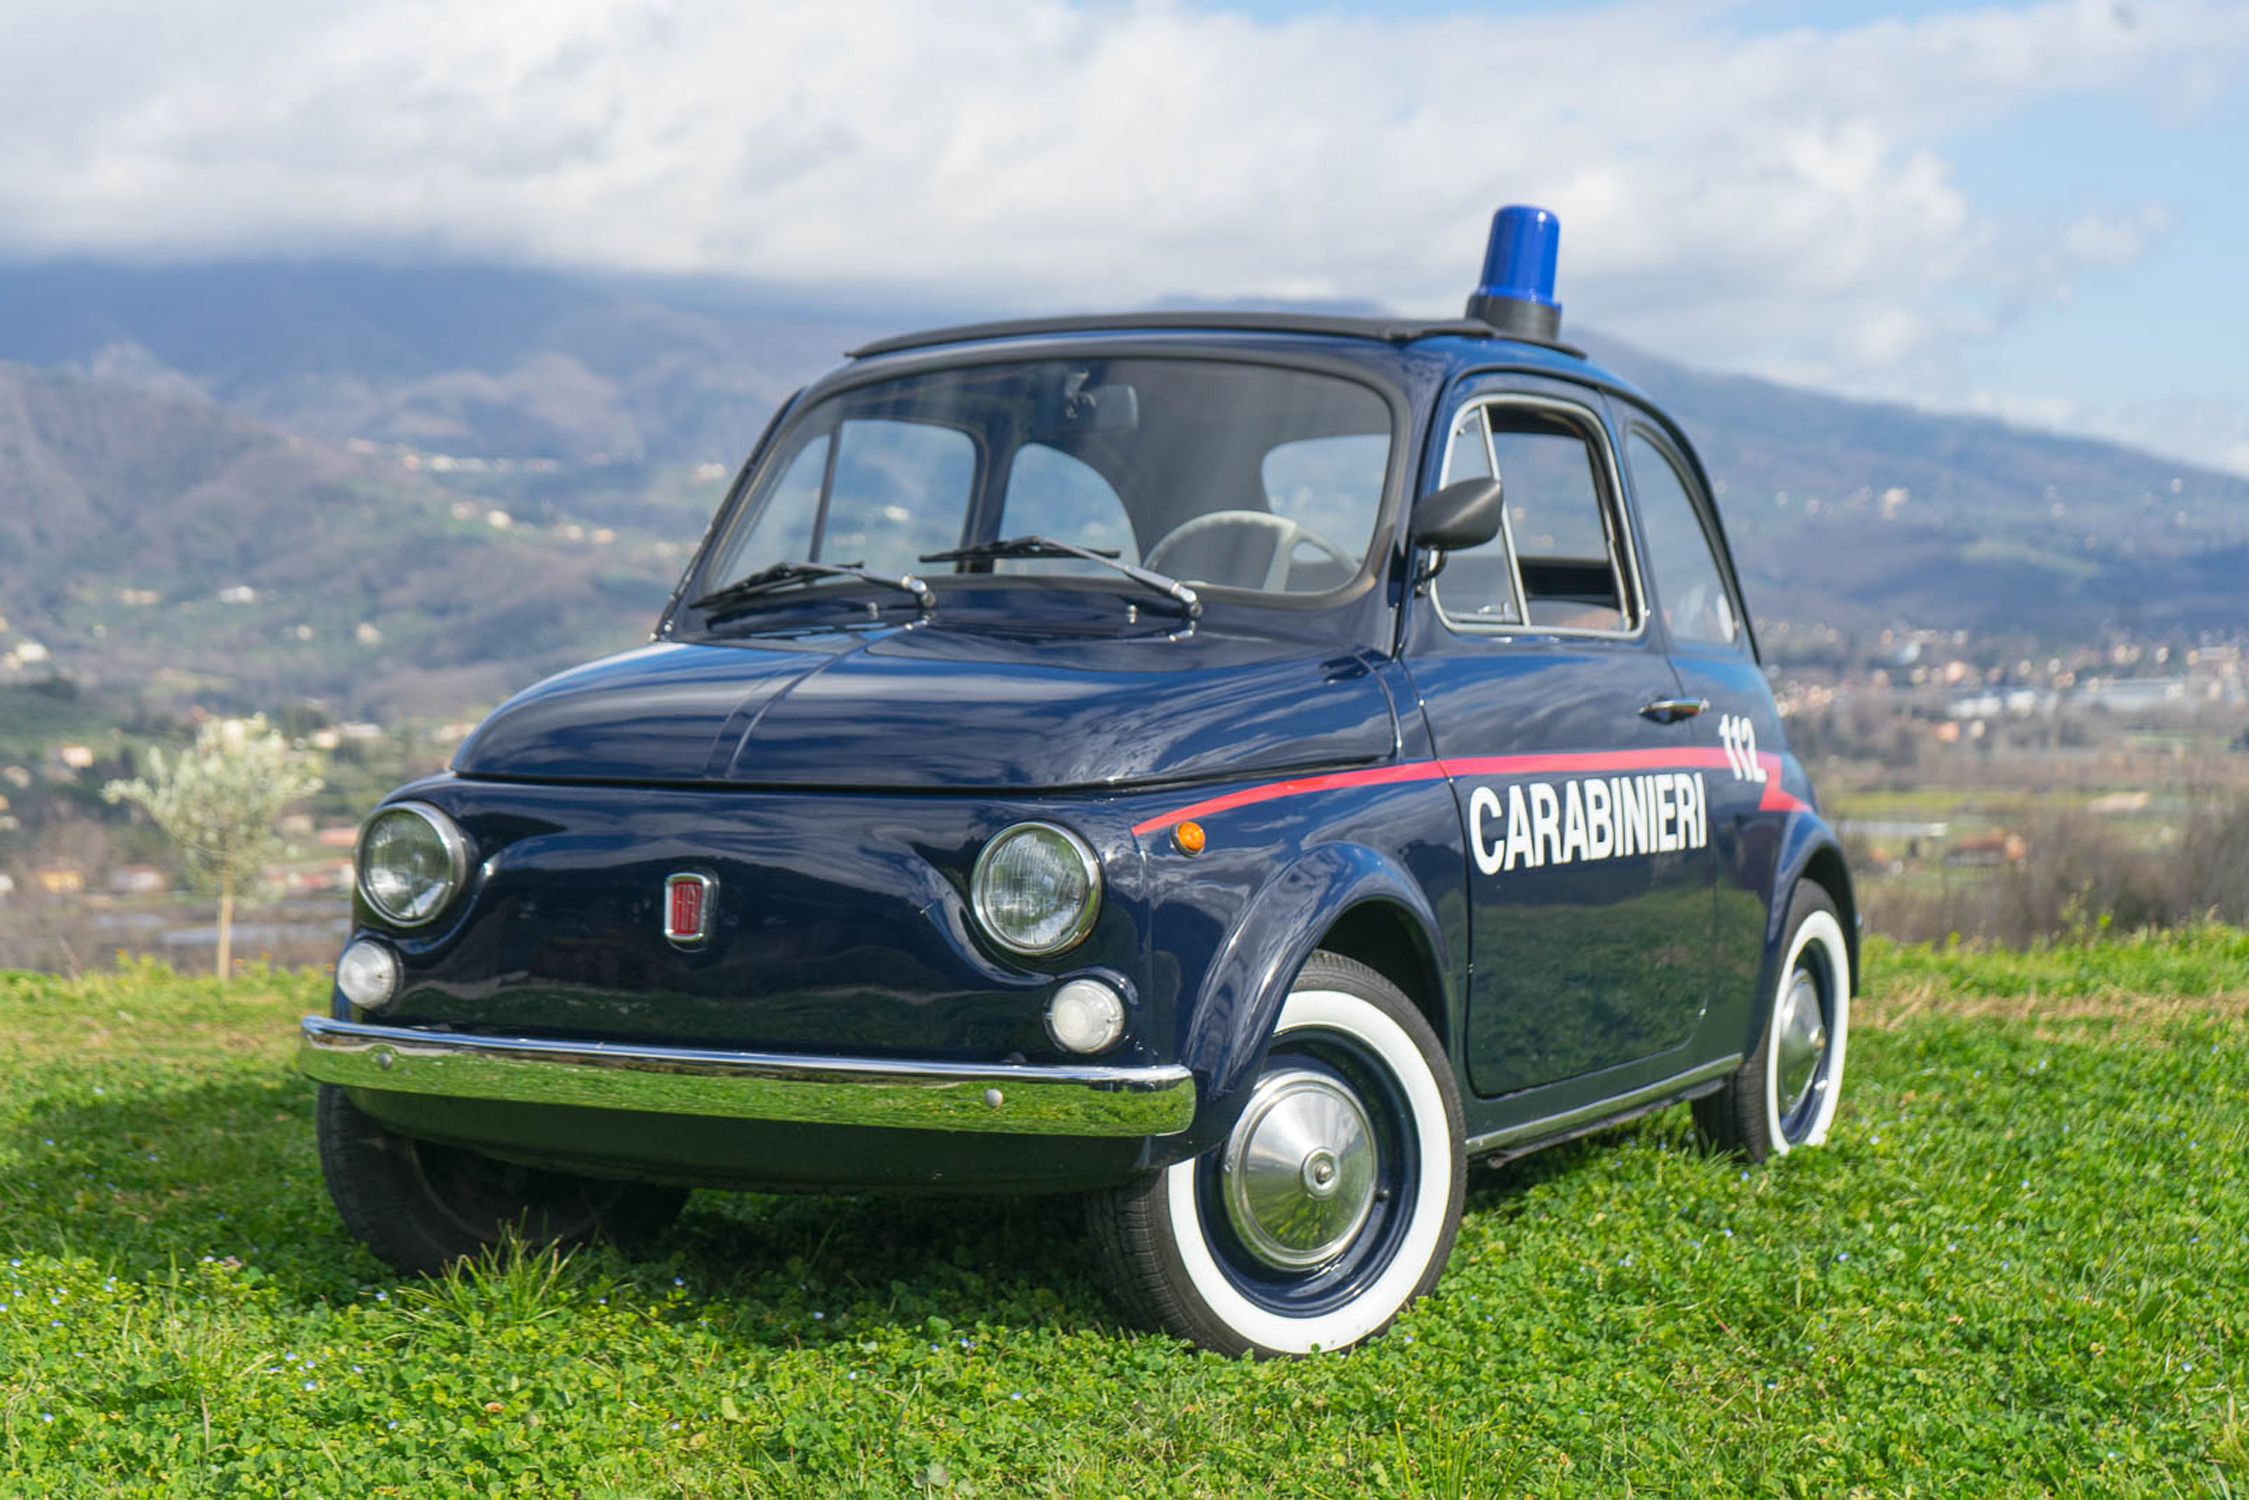 A new company is offering restored original Fiat 500s from €9,000